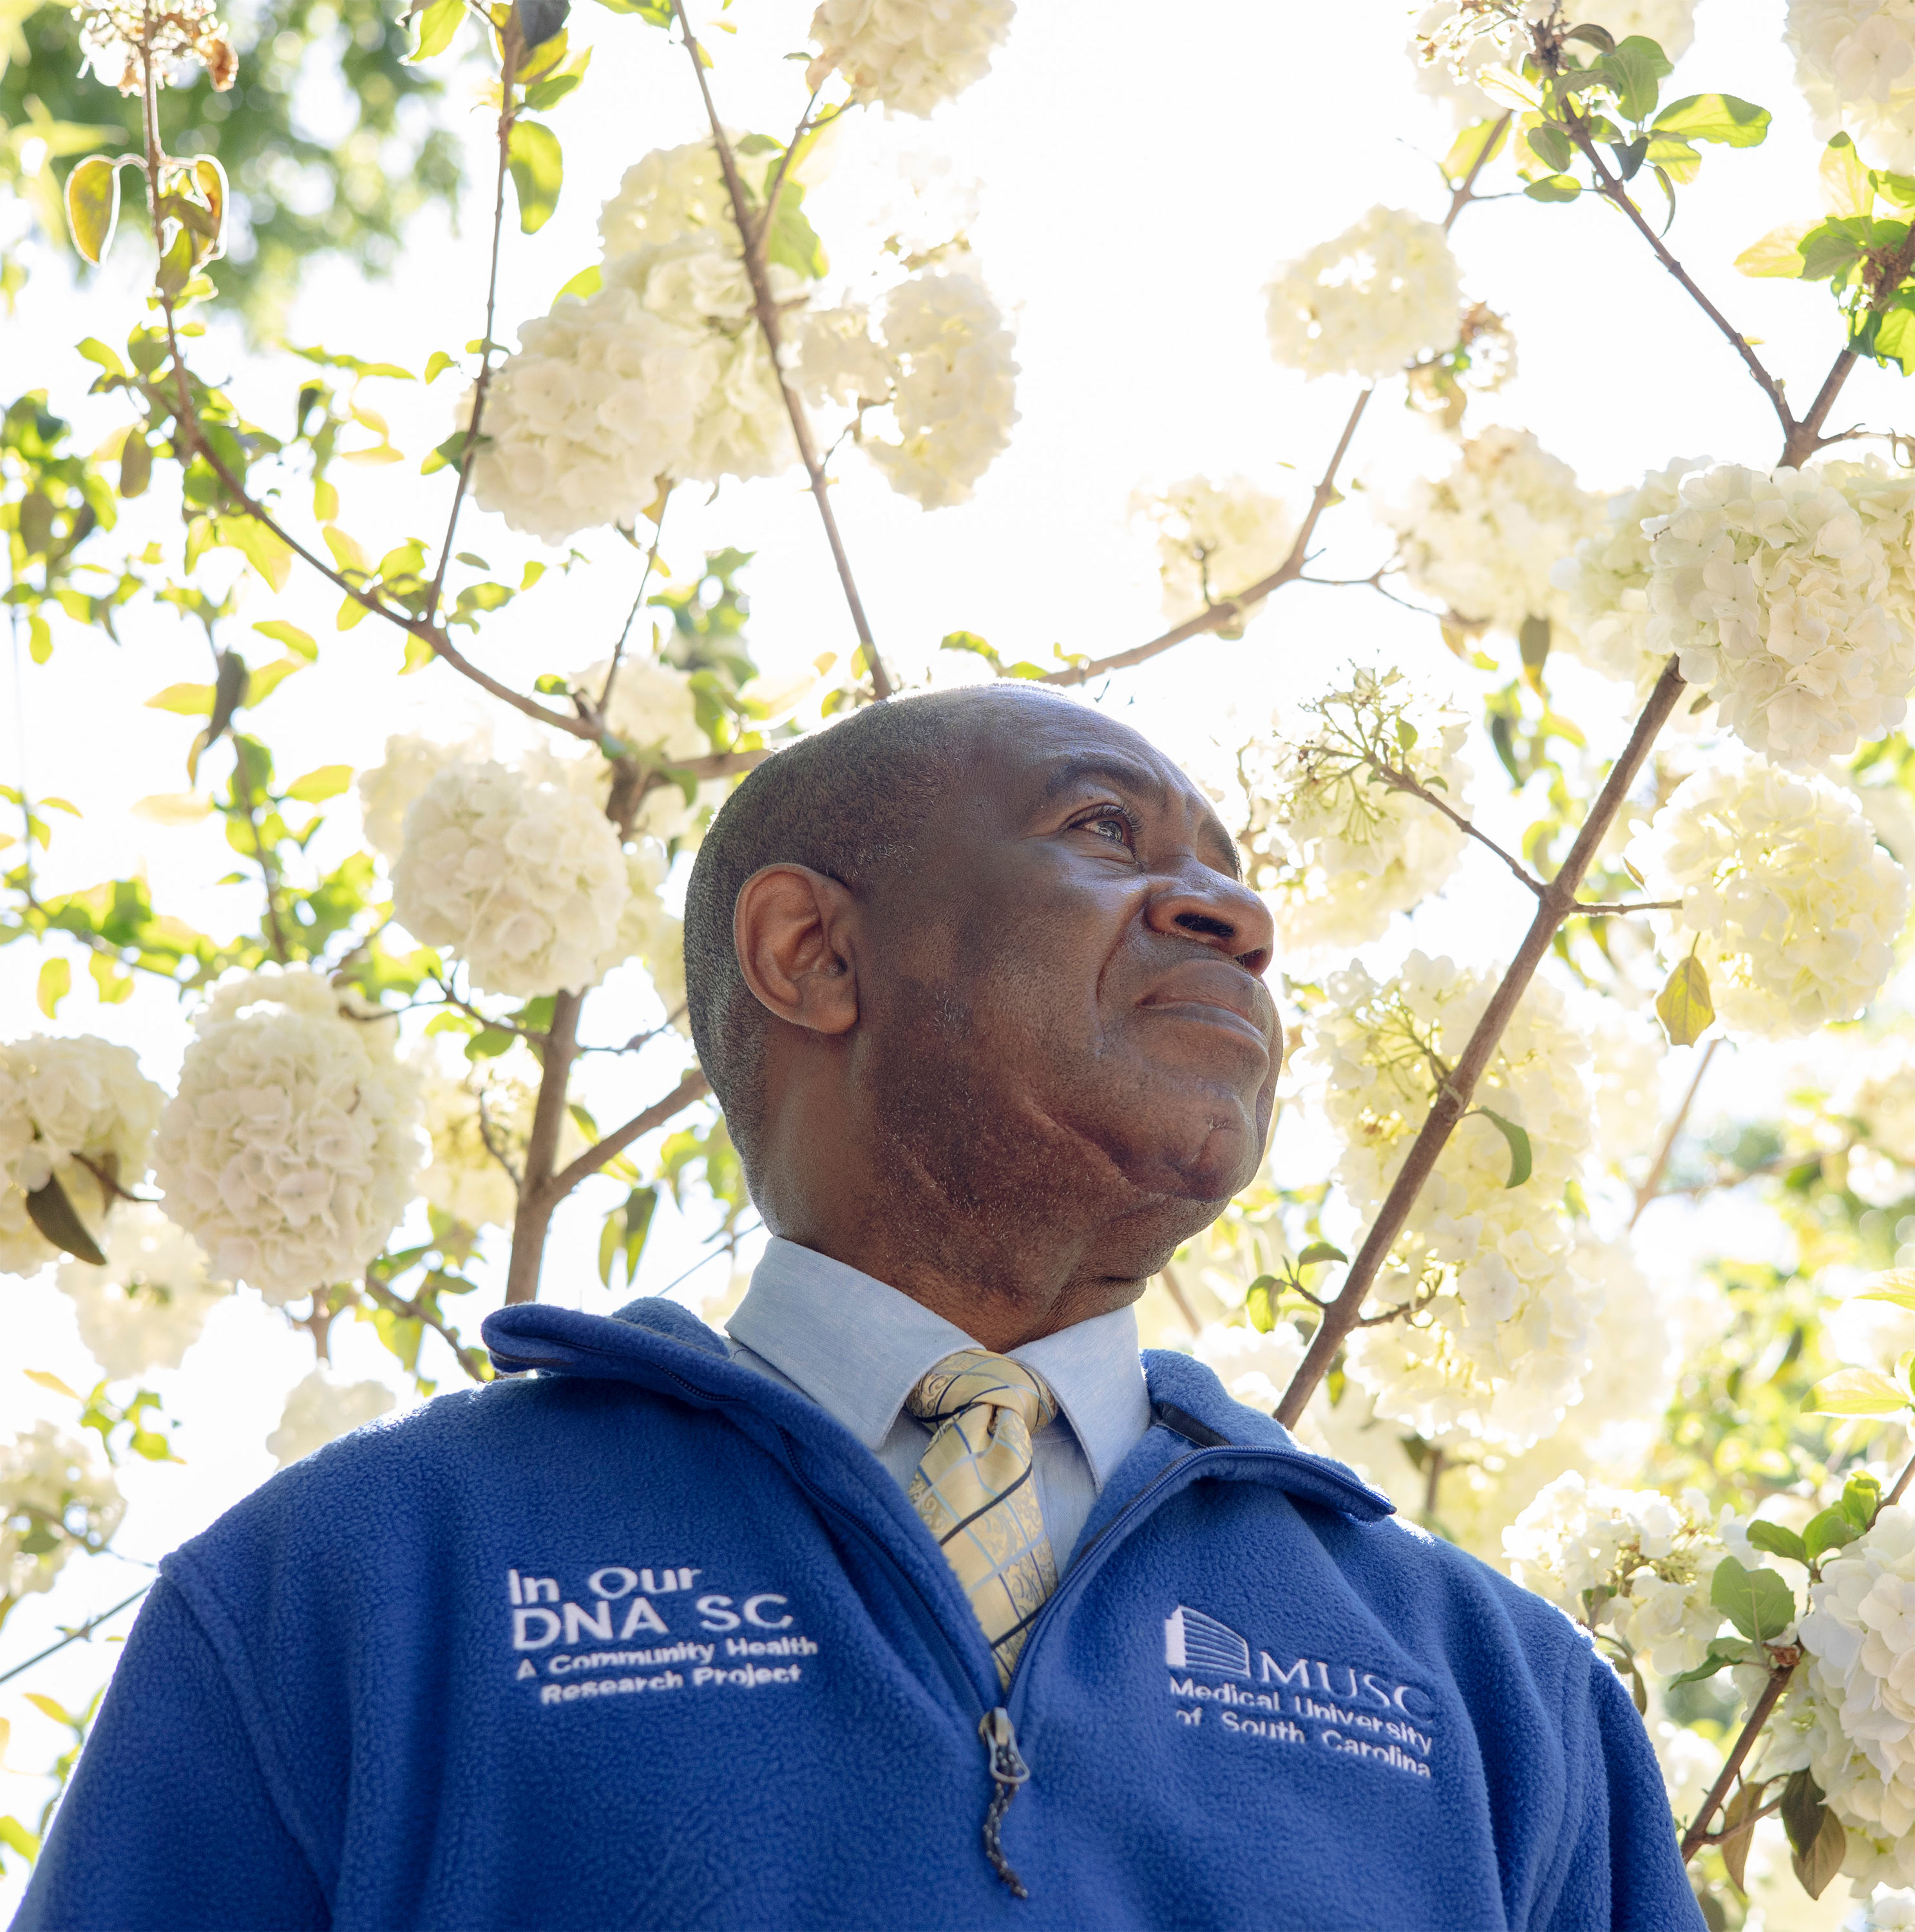 A photo of Lee Moultrie outside. The portrait is shot from below, so his head is framed by white blooms on the trees above him.